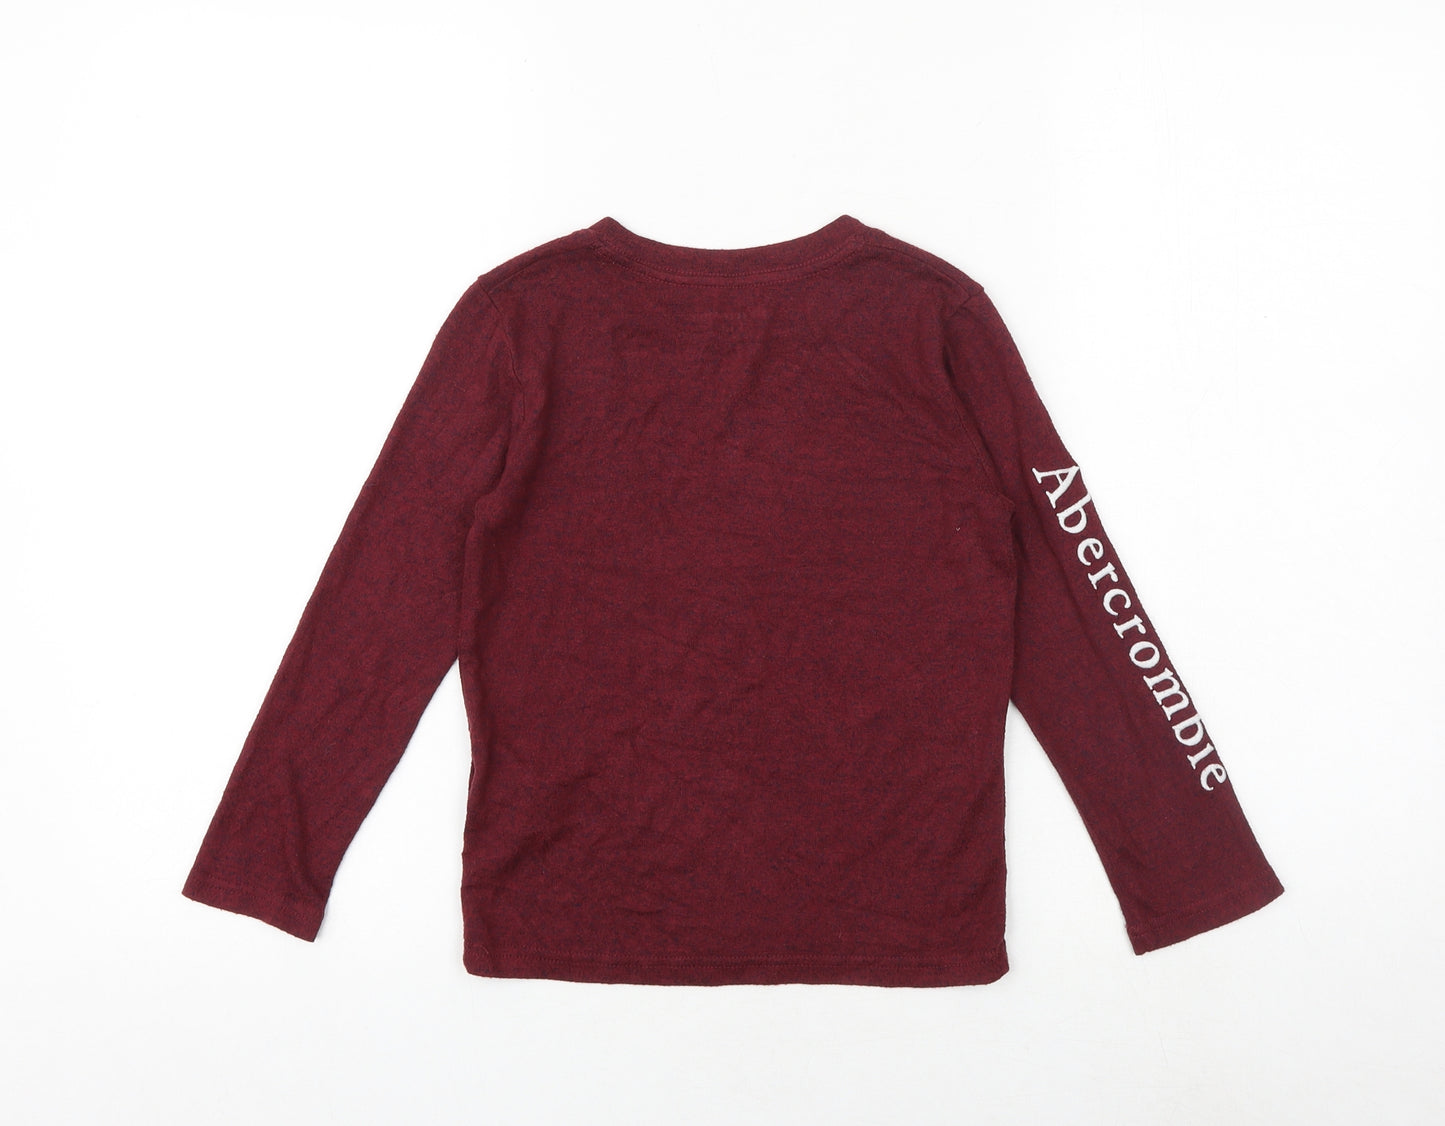 Abercrombie & Fitch Boys Red Viscose Basic T-Shirt Size 5-6 Years Round Neck Pullover